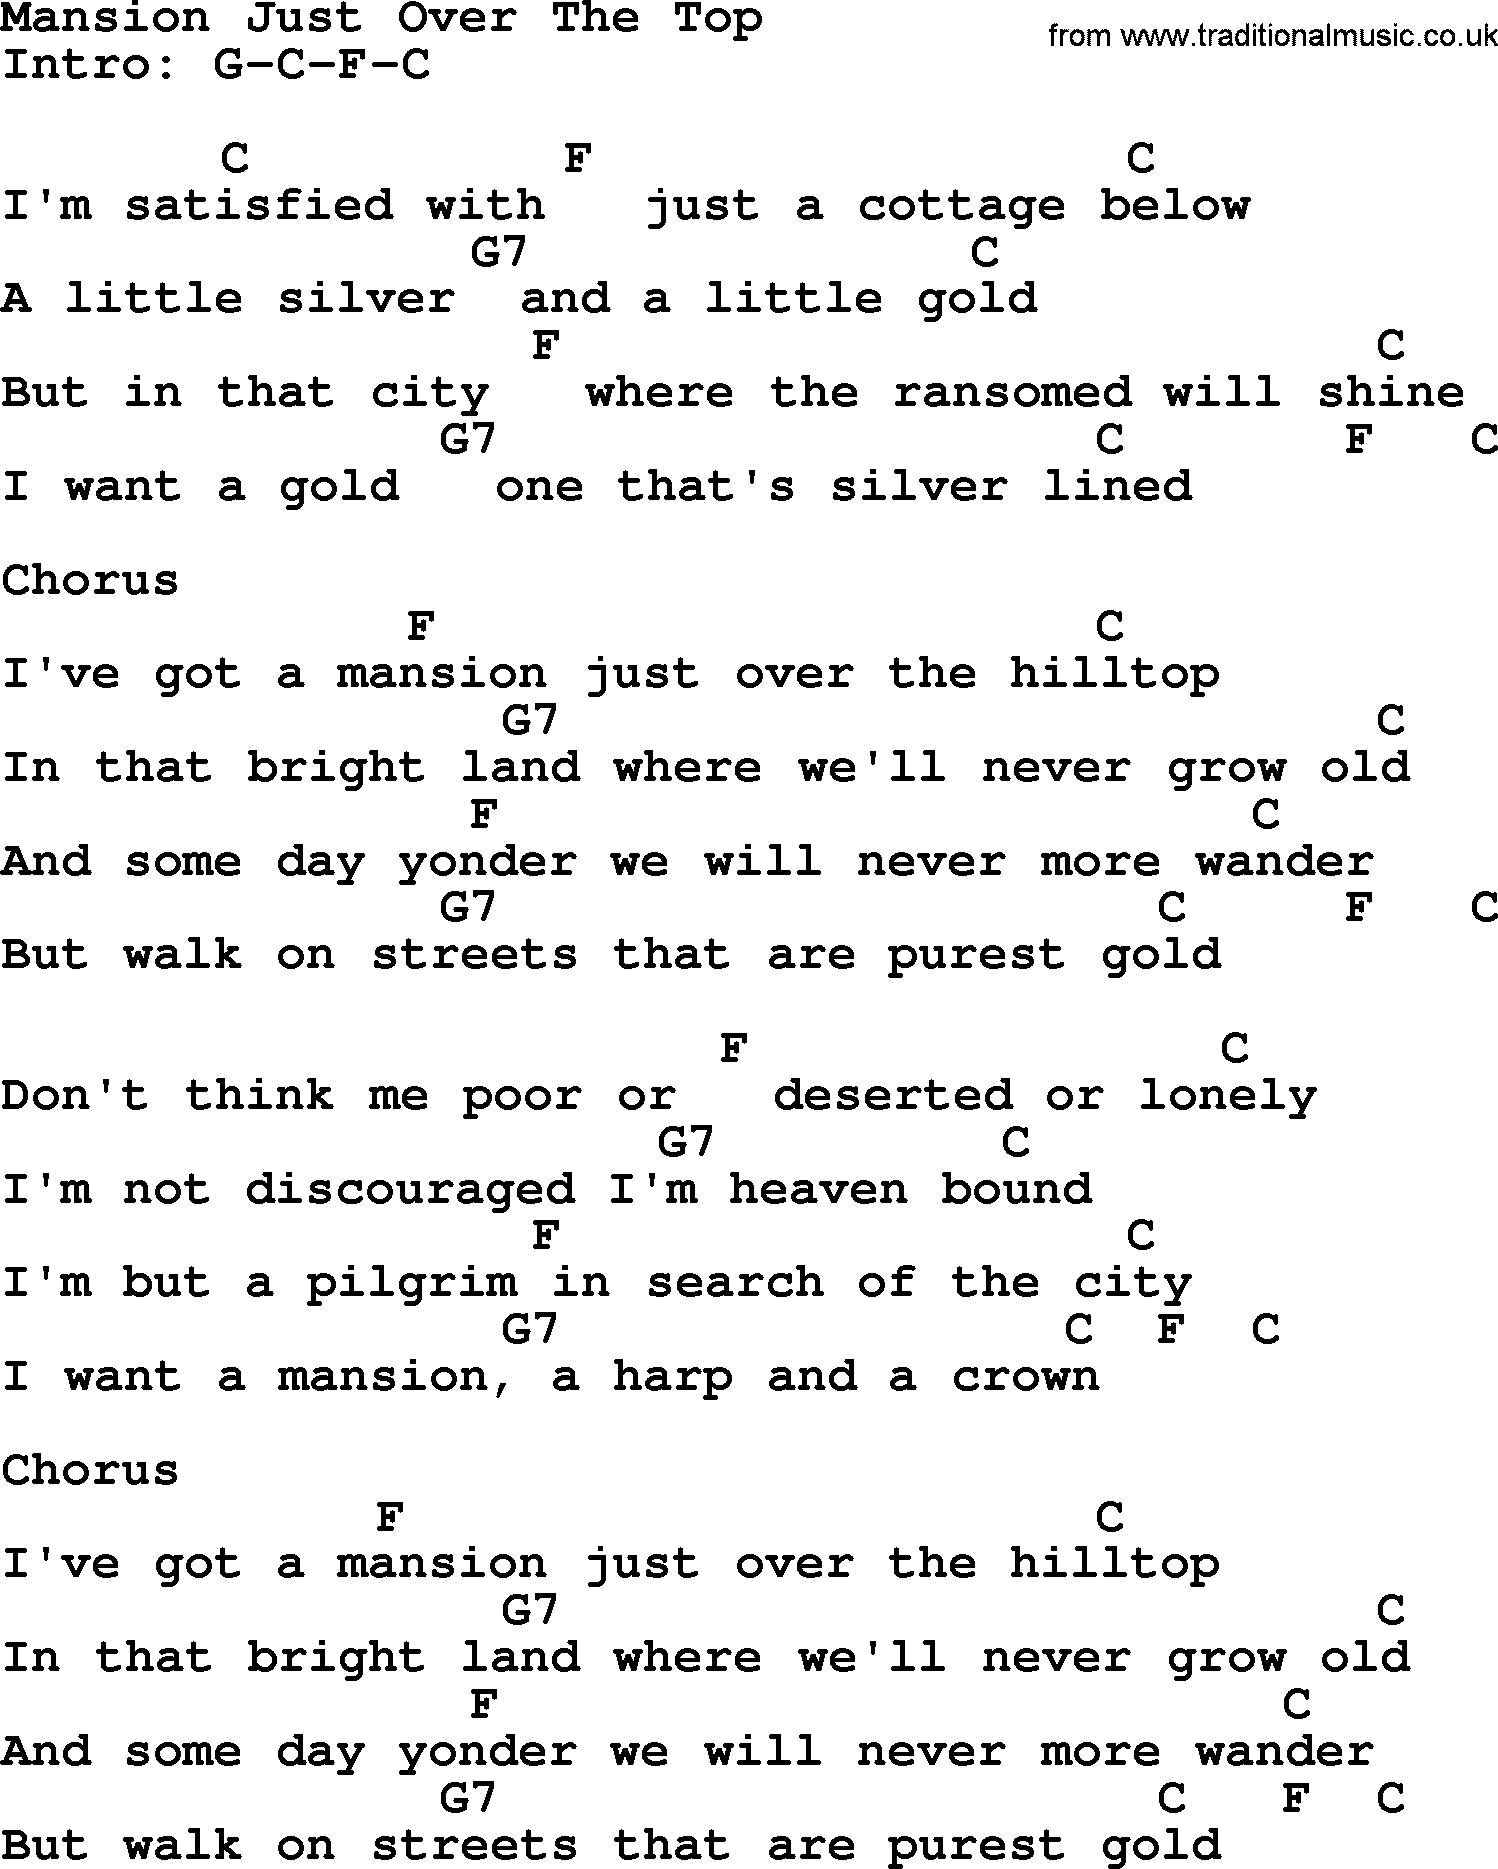 Elvis Presley song: Mansion Just Over The Top, lyrics and chords